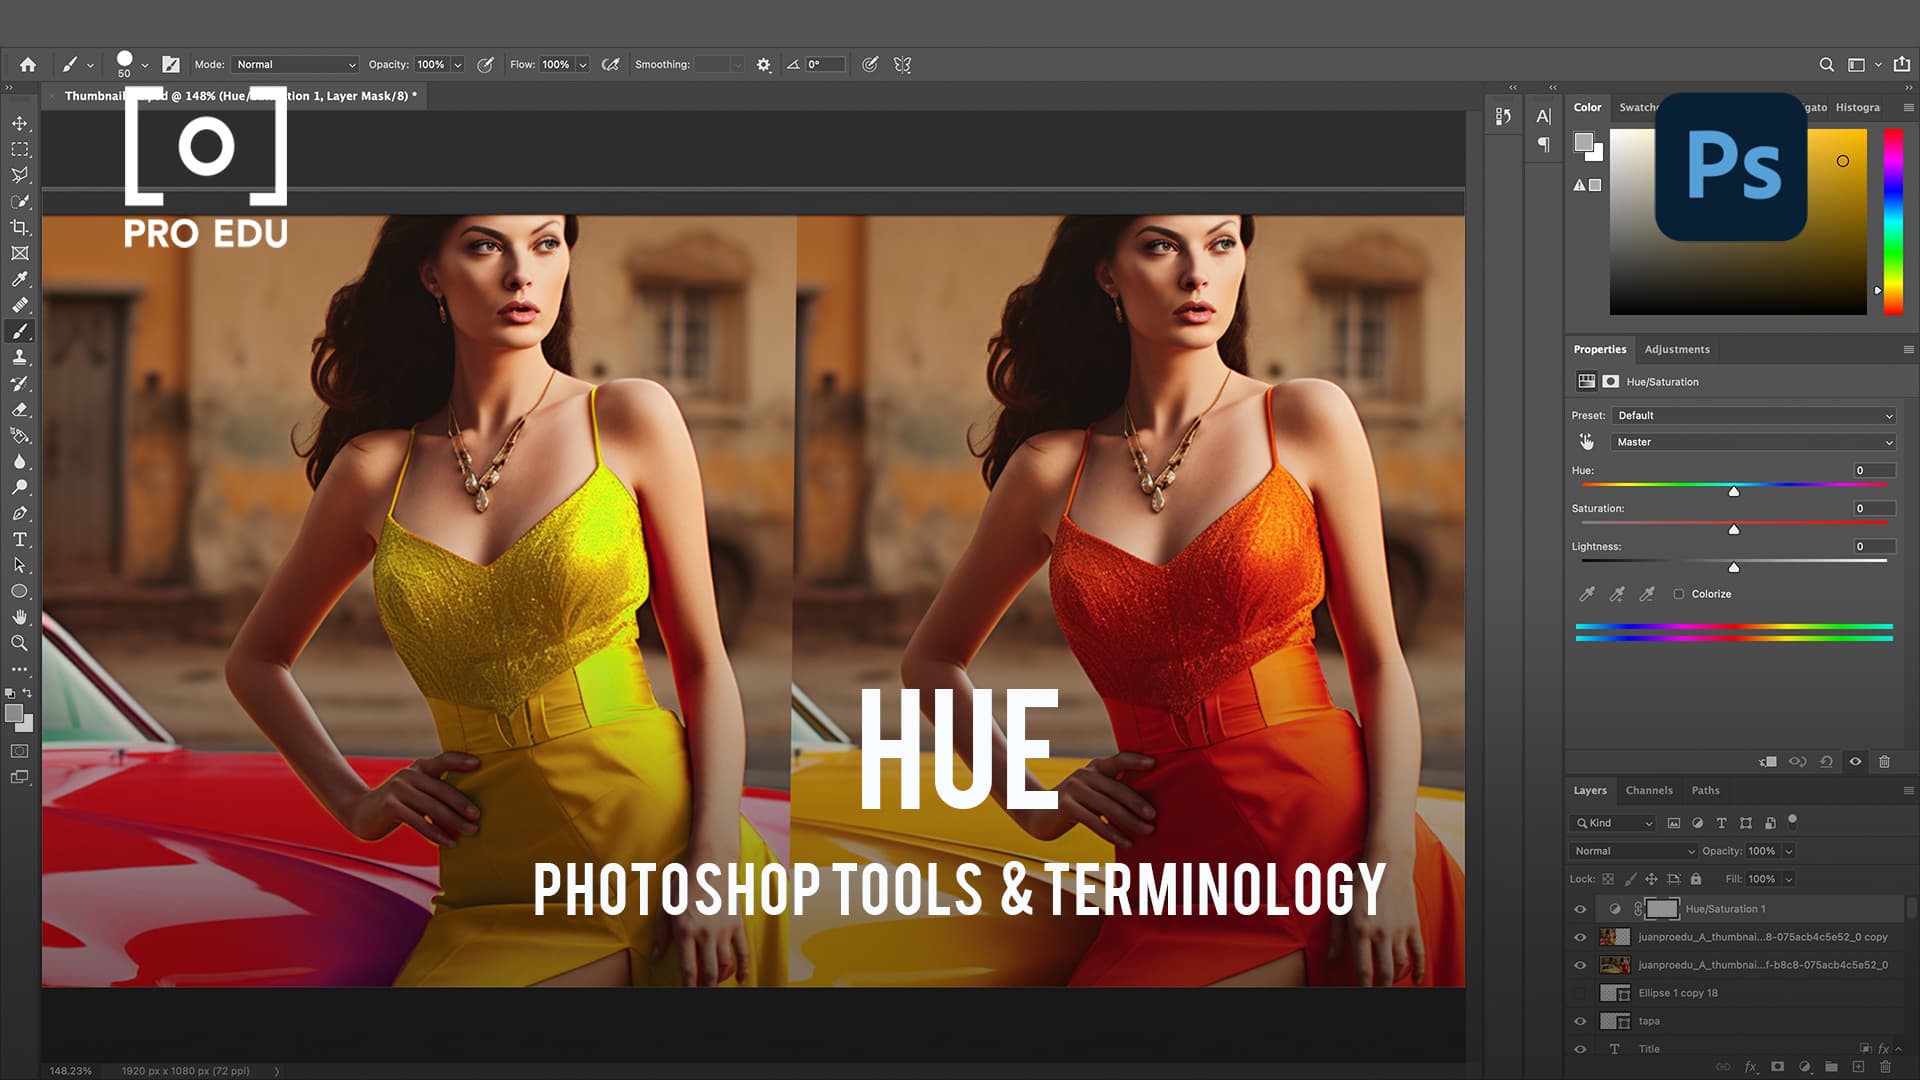 Exploring Hue in Photoshop - PRO EDU Color Theory Guide